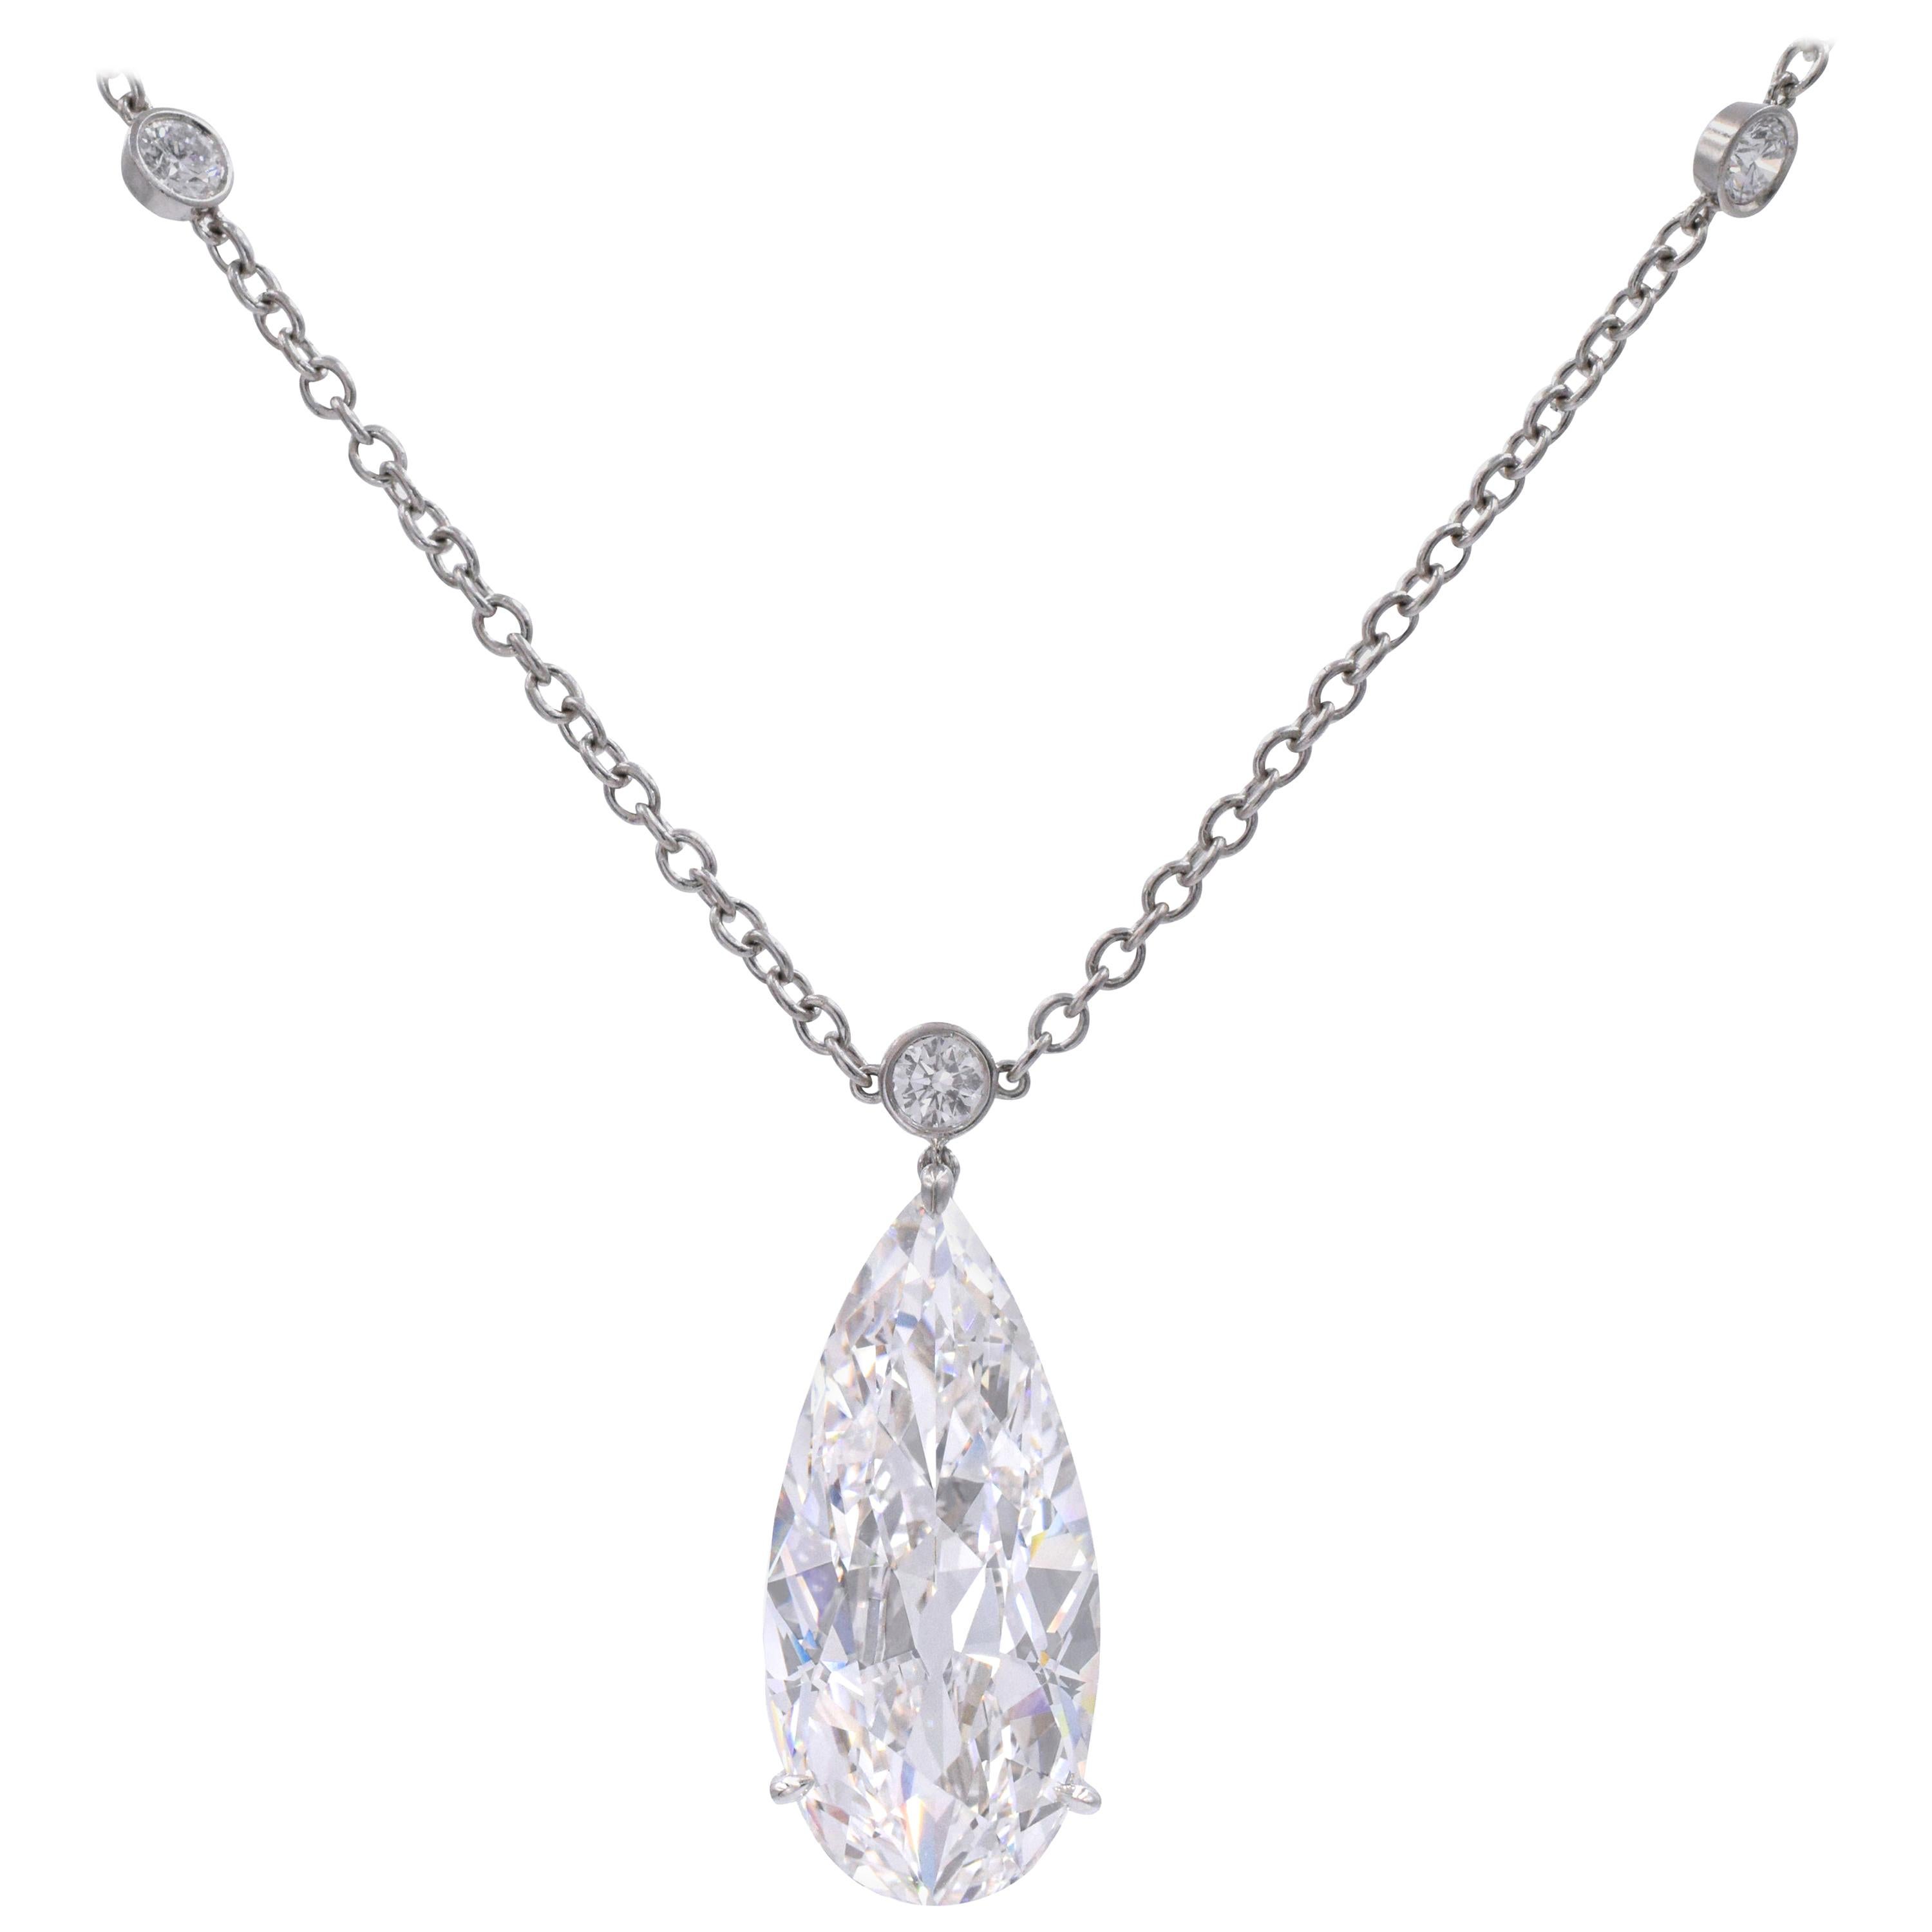 Harry Winston D Color IF Clarity GIA Certified Diamond Pendant or Necklace